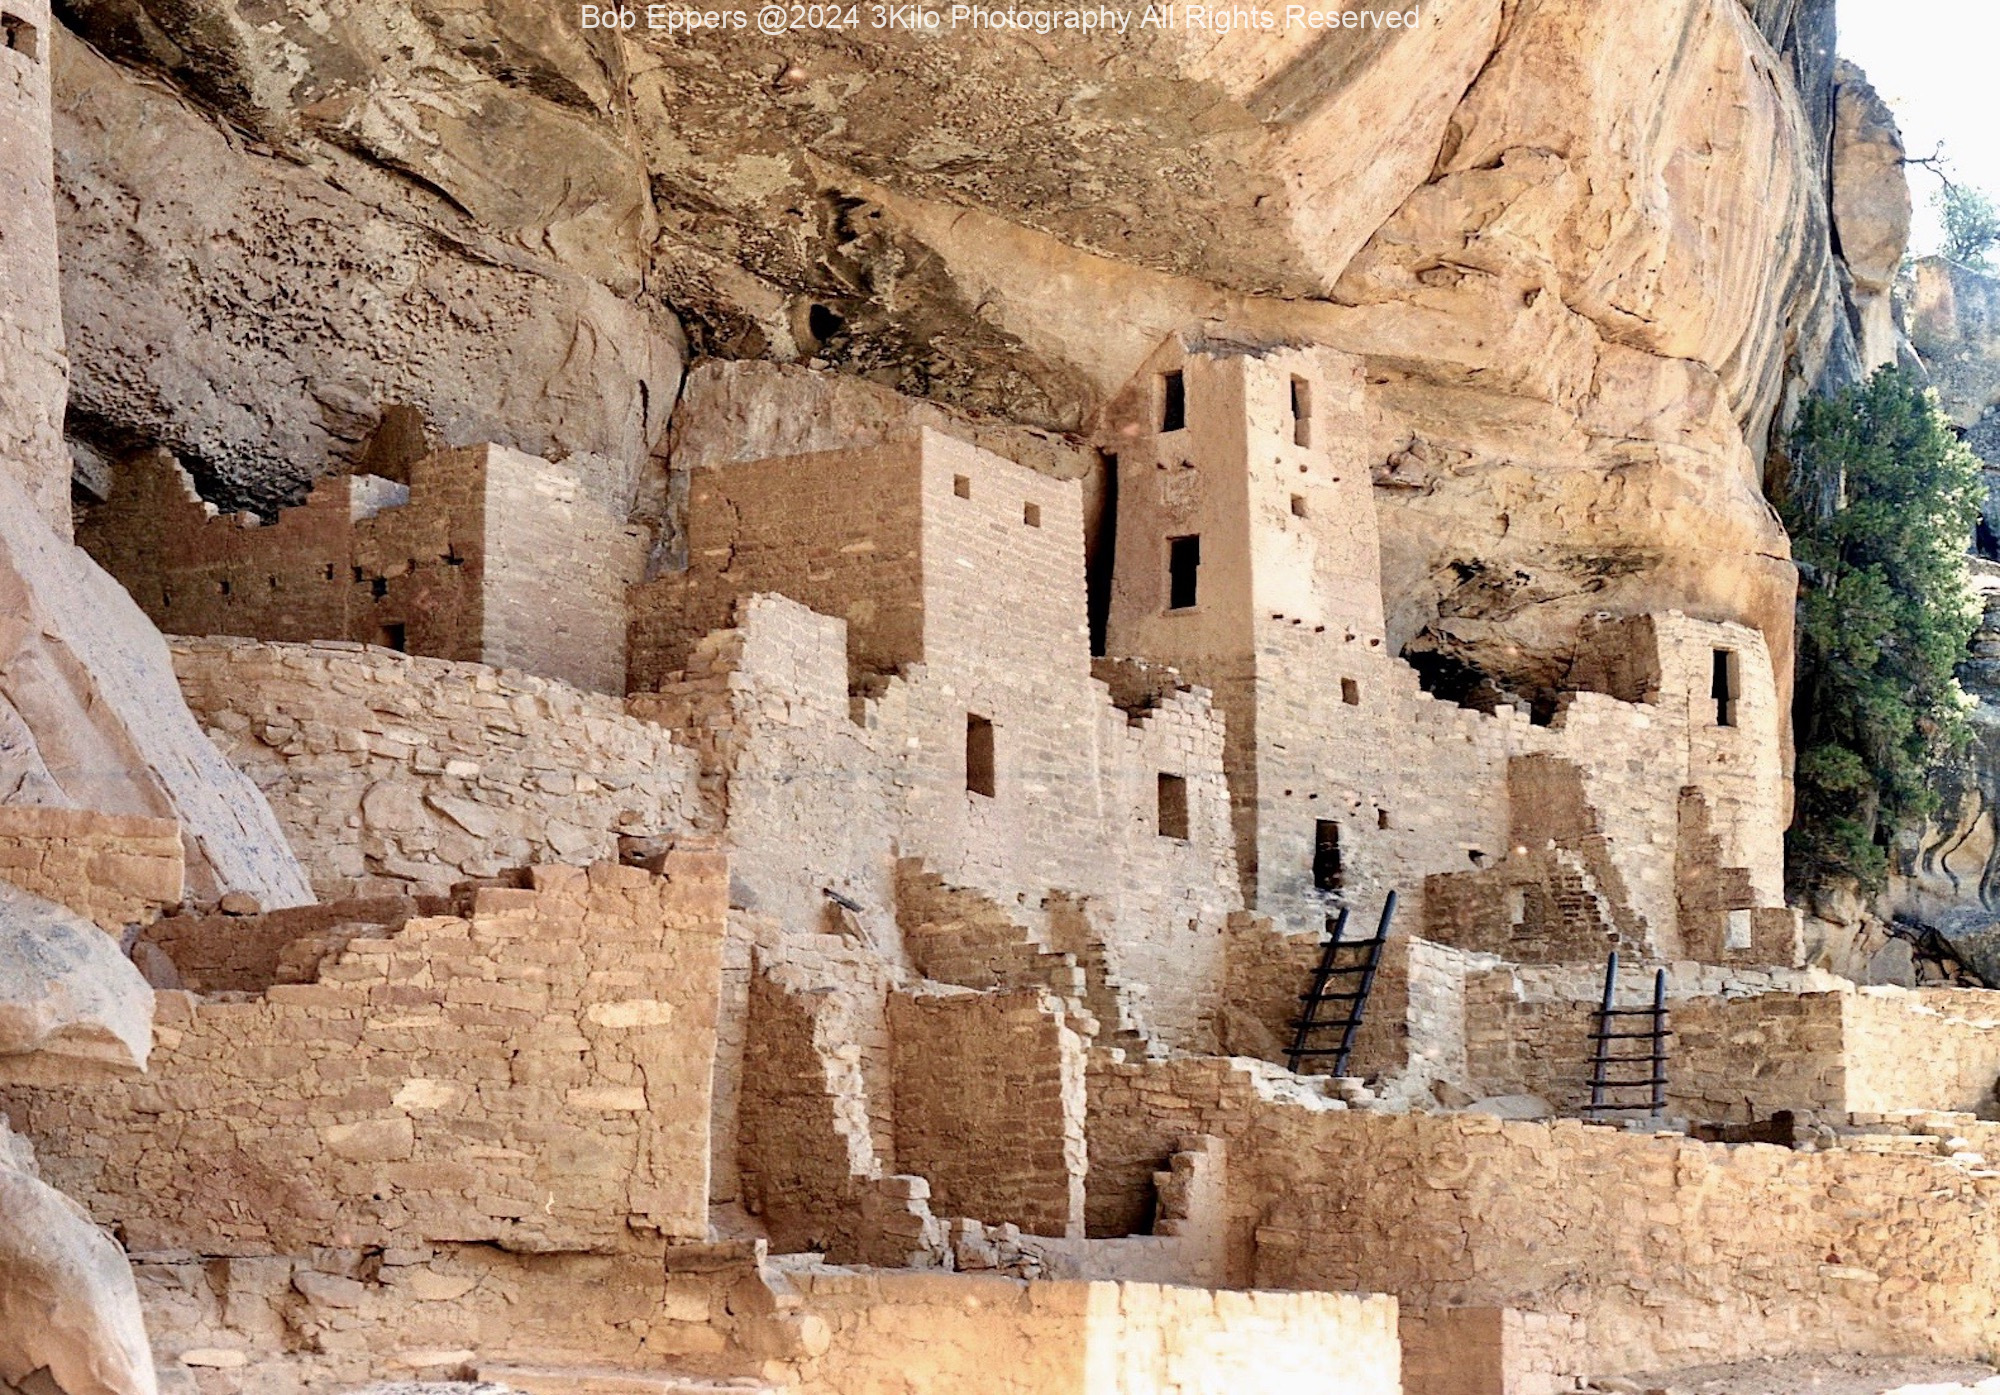 Photo taken at Mesa Verde Cliff Dwellings in CO.  This was taken from a 35mm slide over 20 years ago.